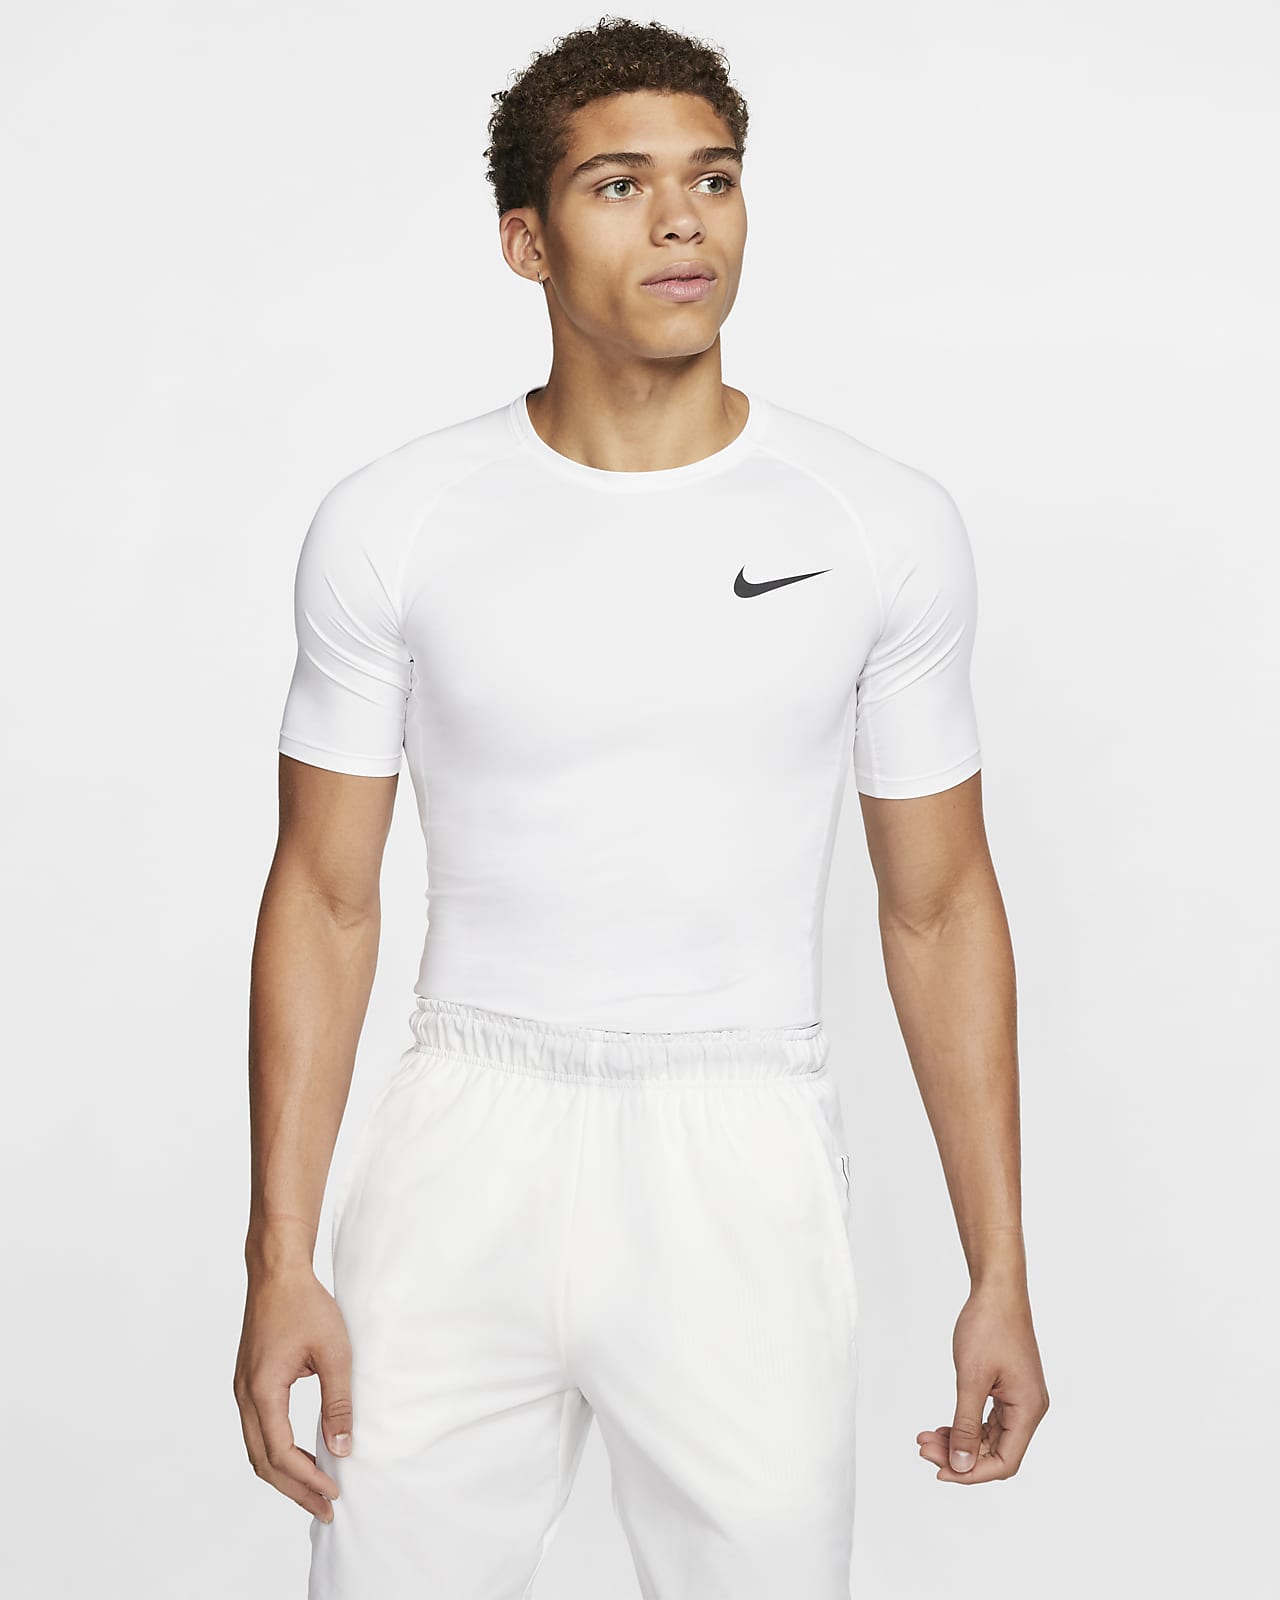 Tight-Fit Short-Sleeve Top. Nike CA